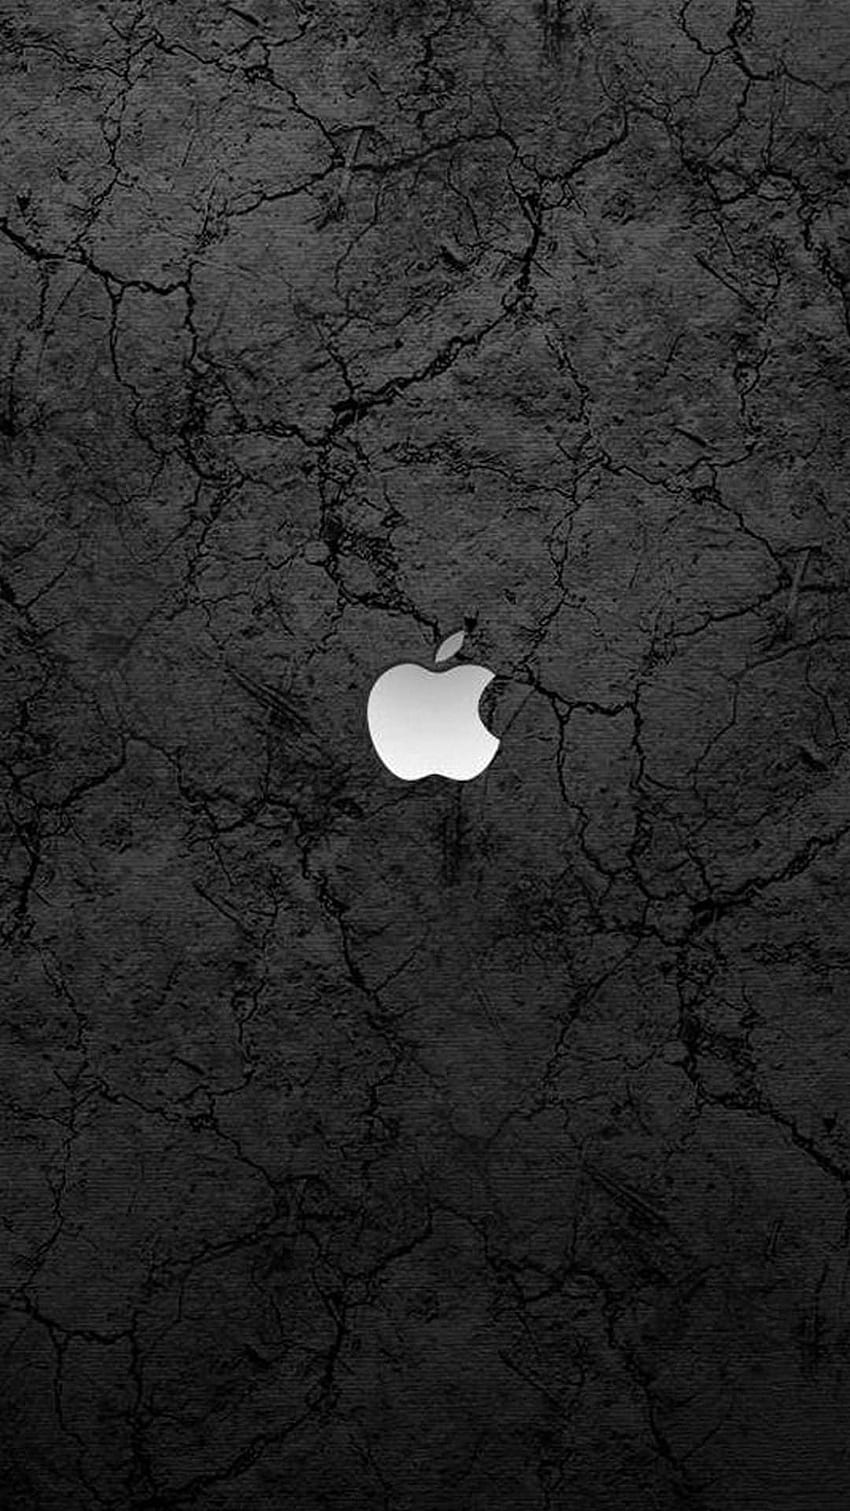 Kiani cuvelier on iPhone achtergrond. Apple, Black and White 7 HD phone wallpaper